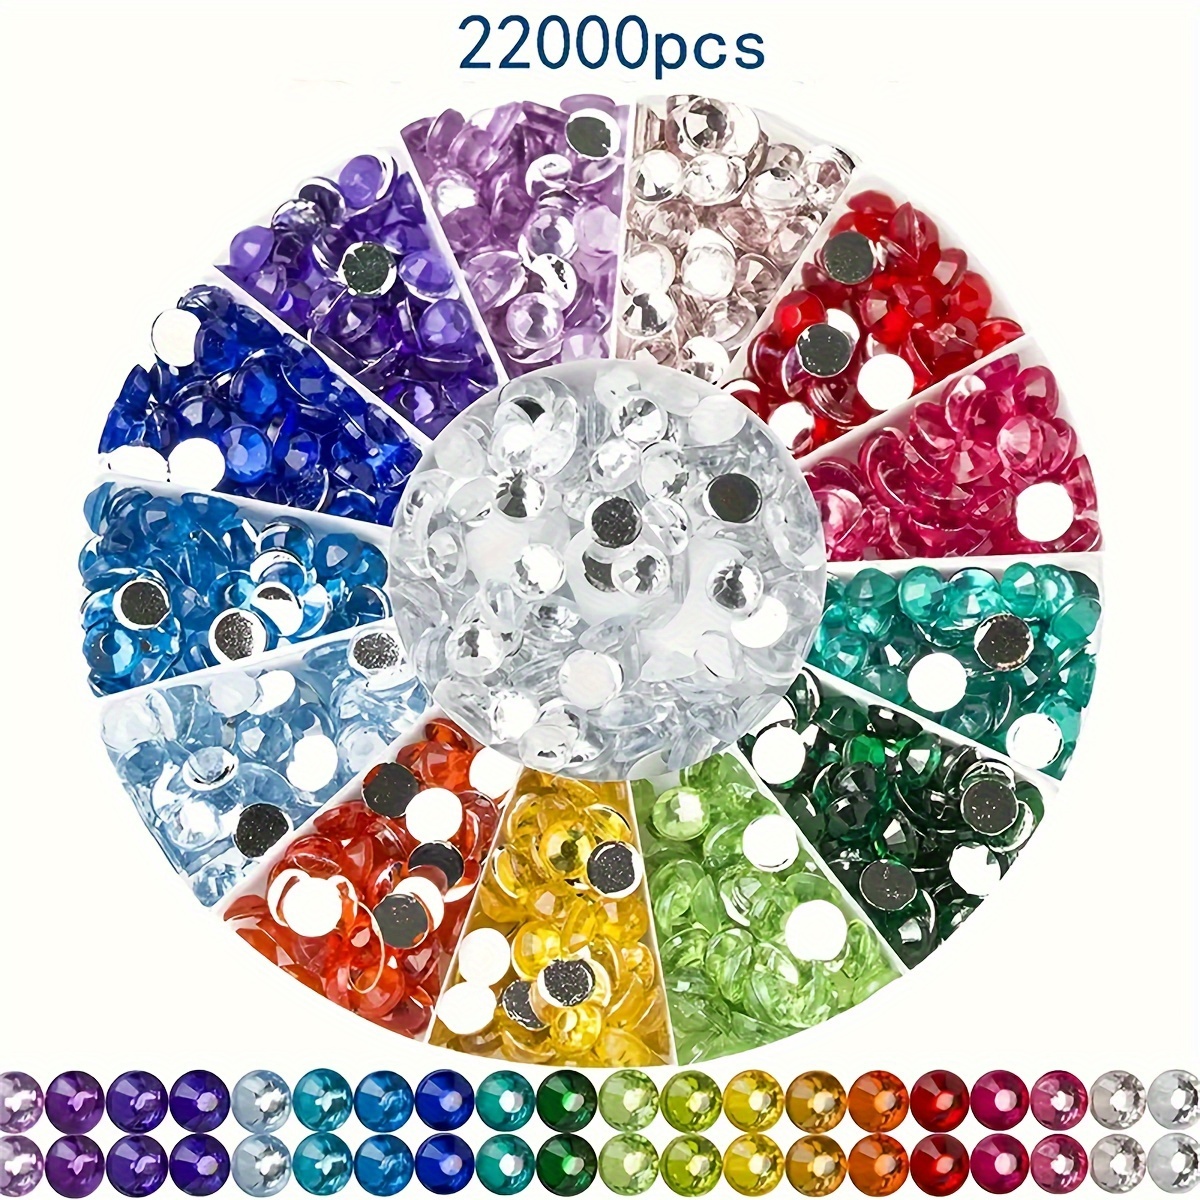 

22000pcs 2.8mm Multi-color Rhinestone Diamonds, Flat-backed Pointed Crystal Gems, Assorted 22 Colors, For 5d Diamond Art Painting, Diy Art Craft Decorations